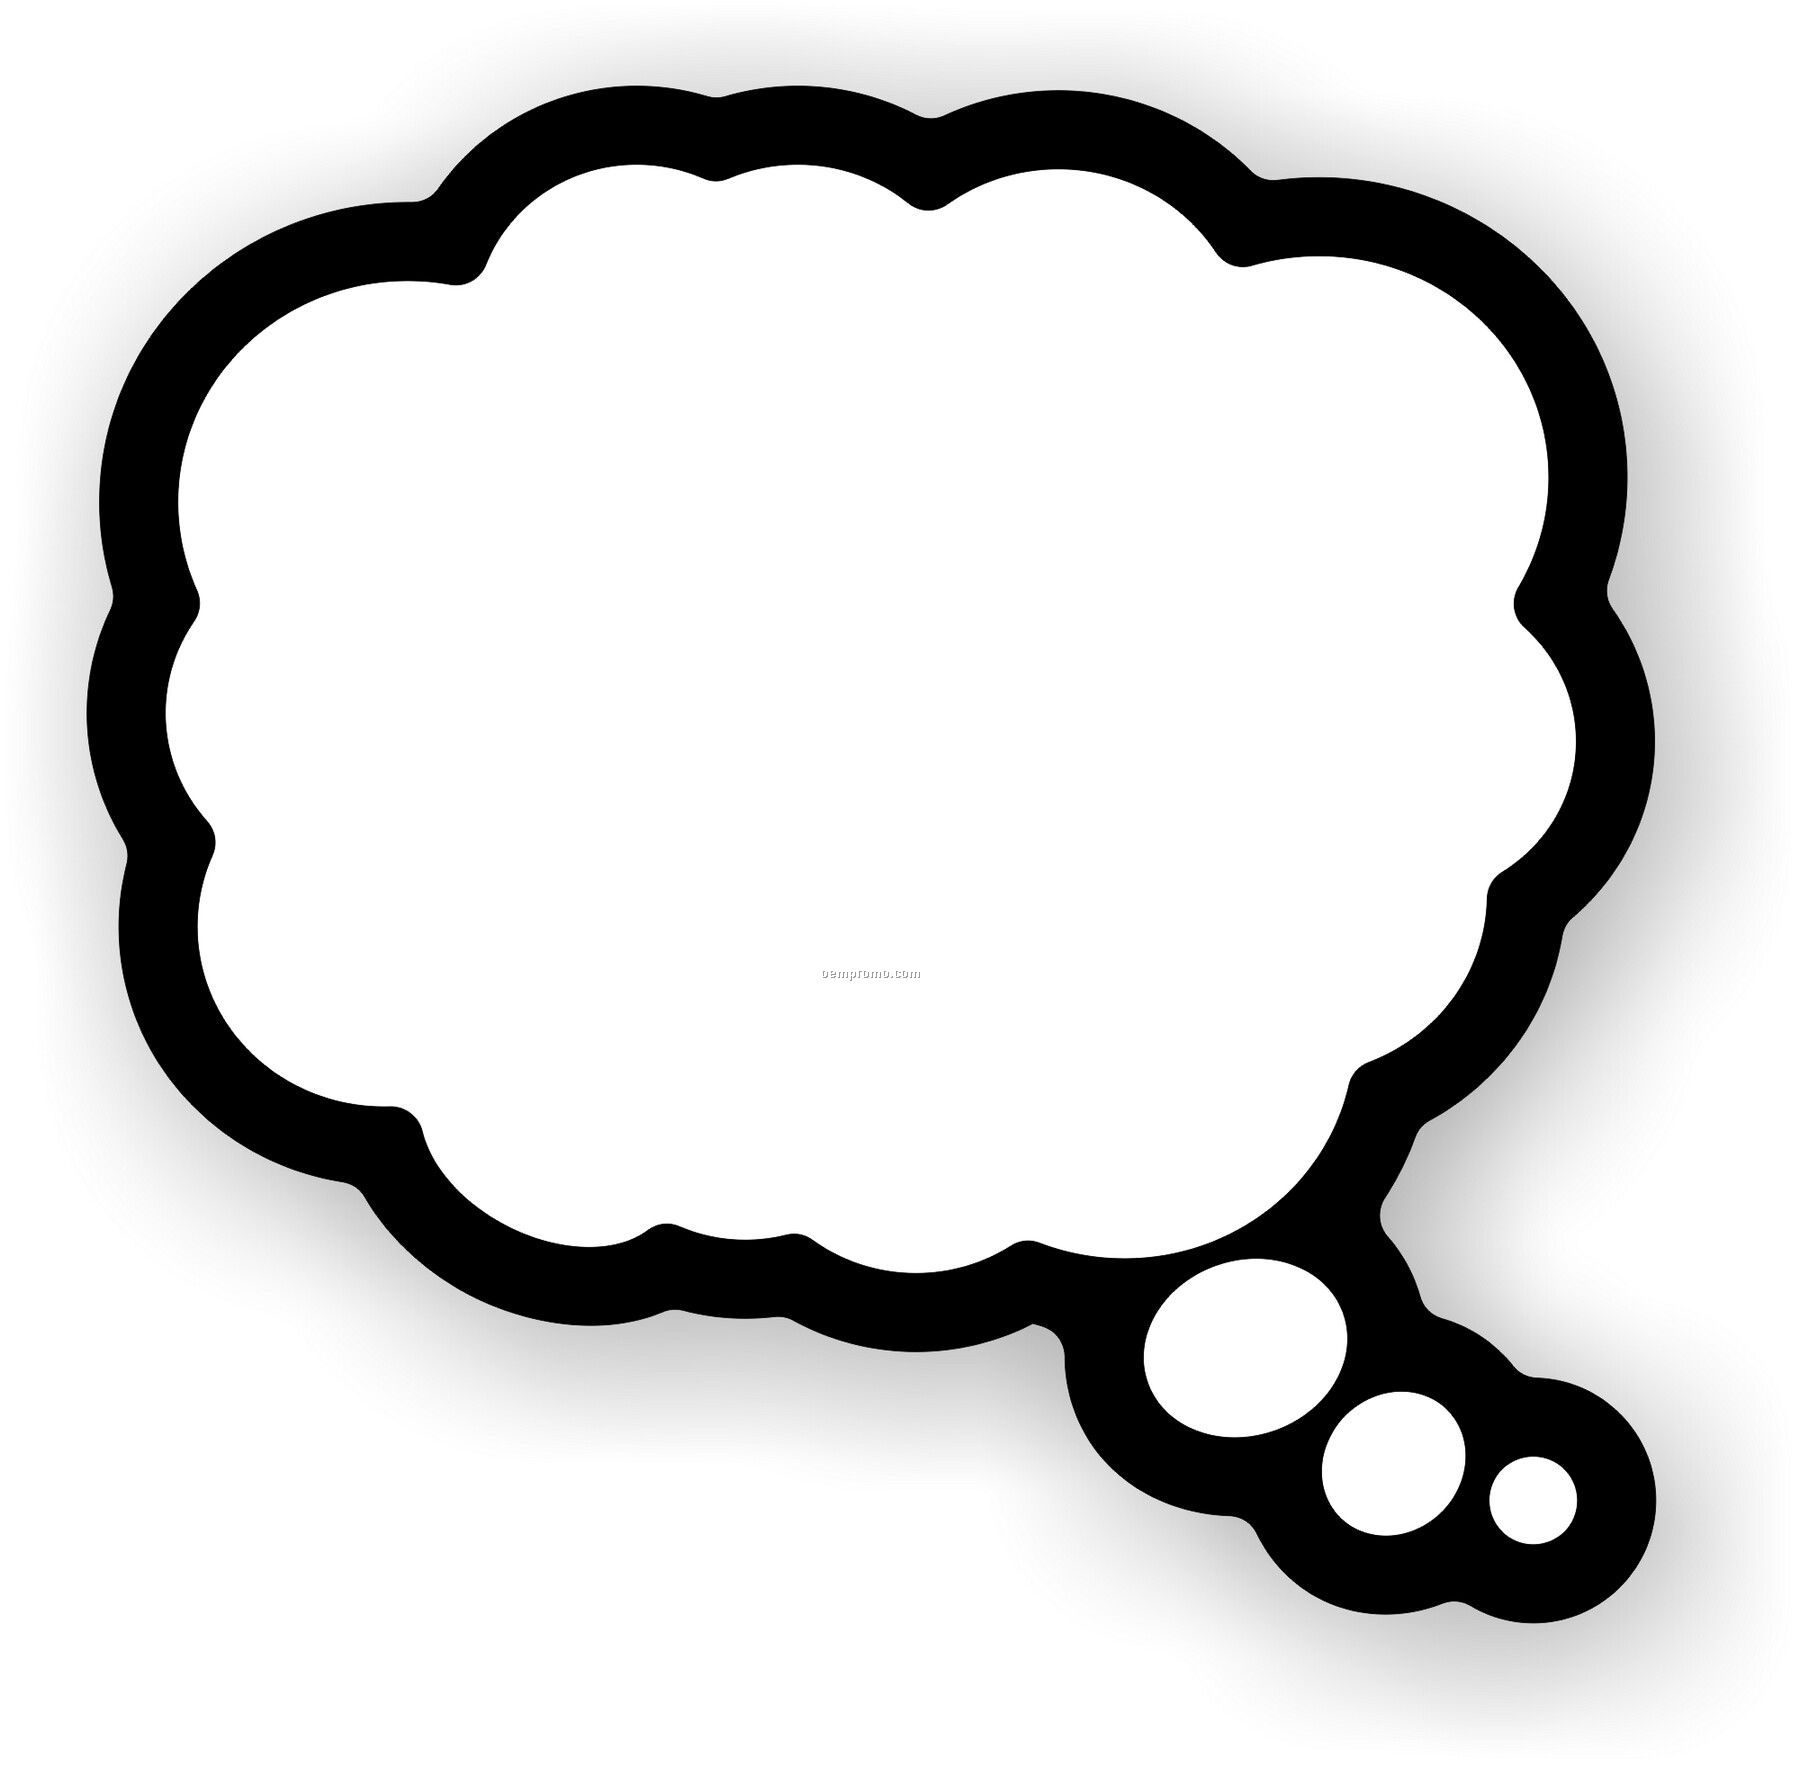 Thinking With Thought Bubble   Clipart Panda   Free Clipart Images